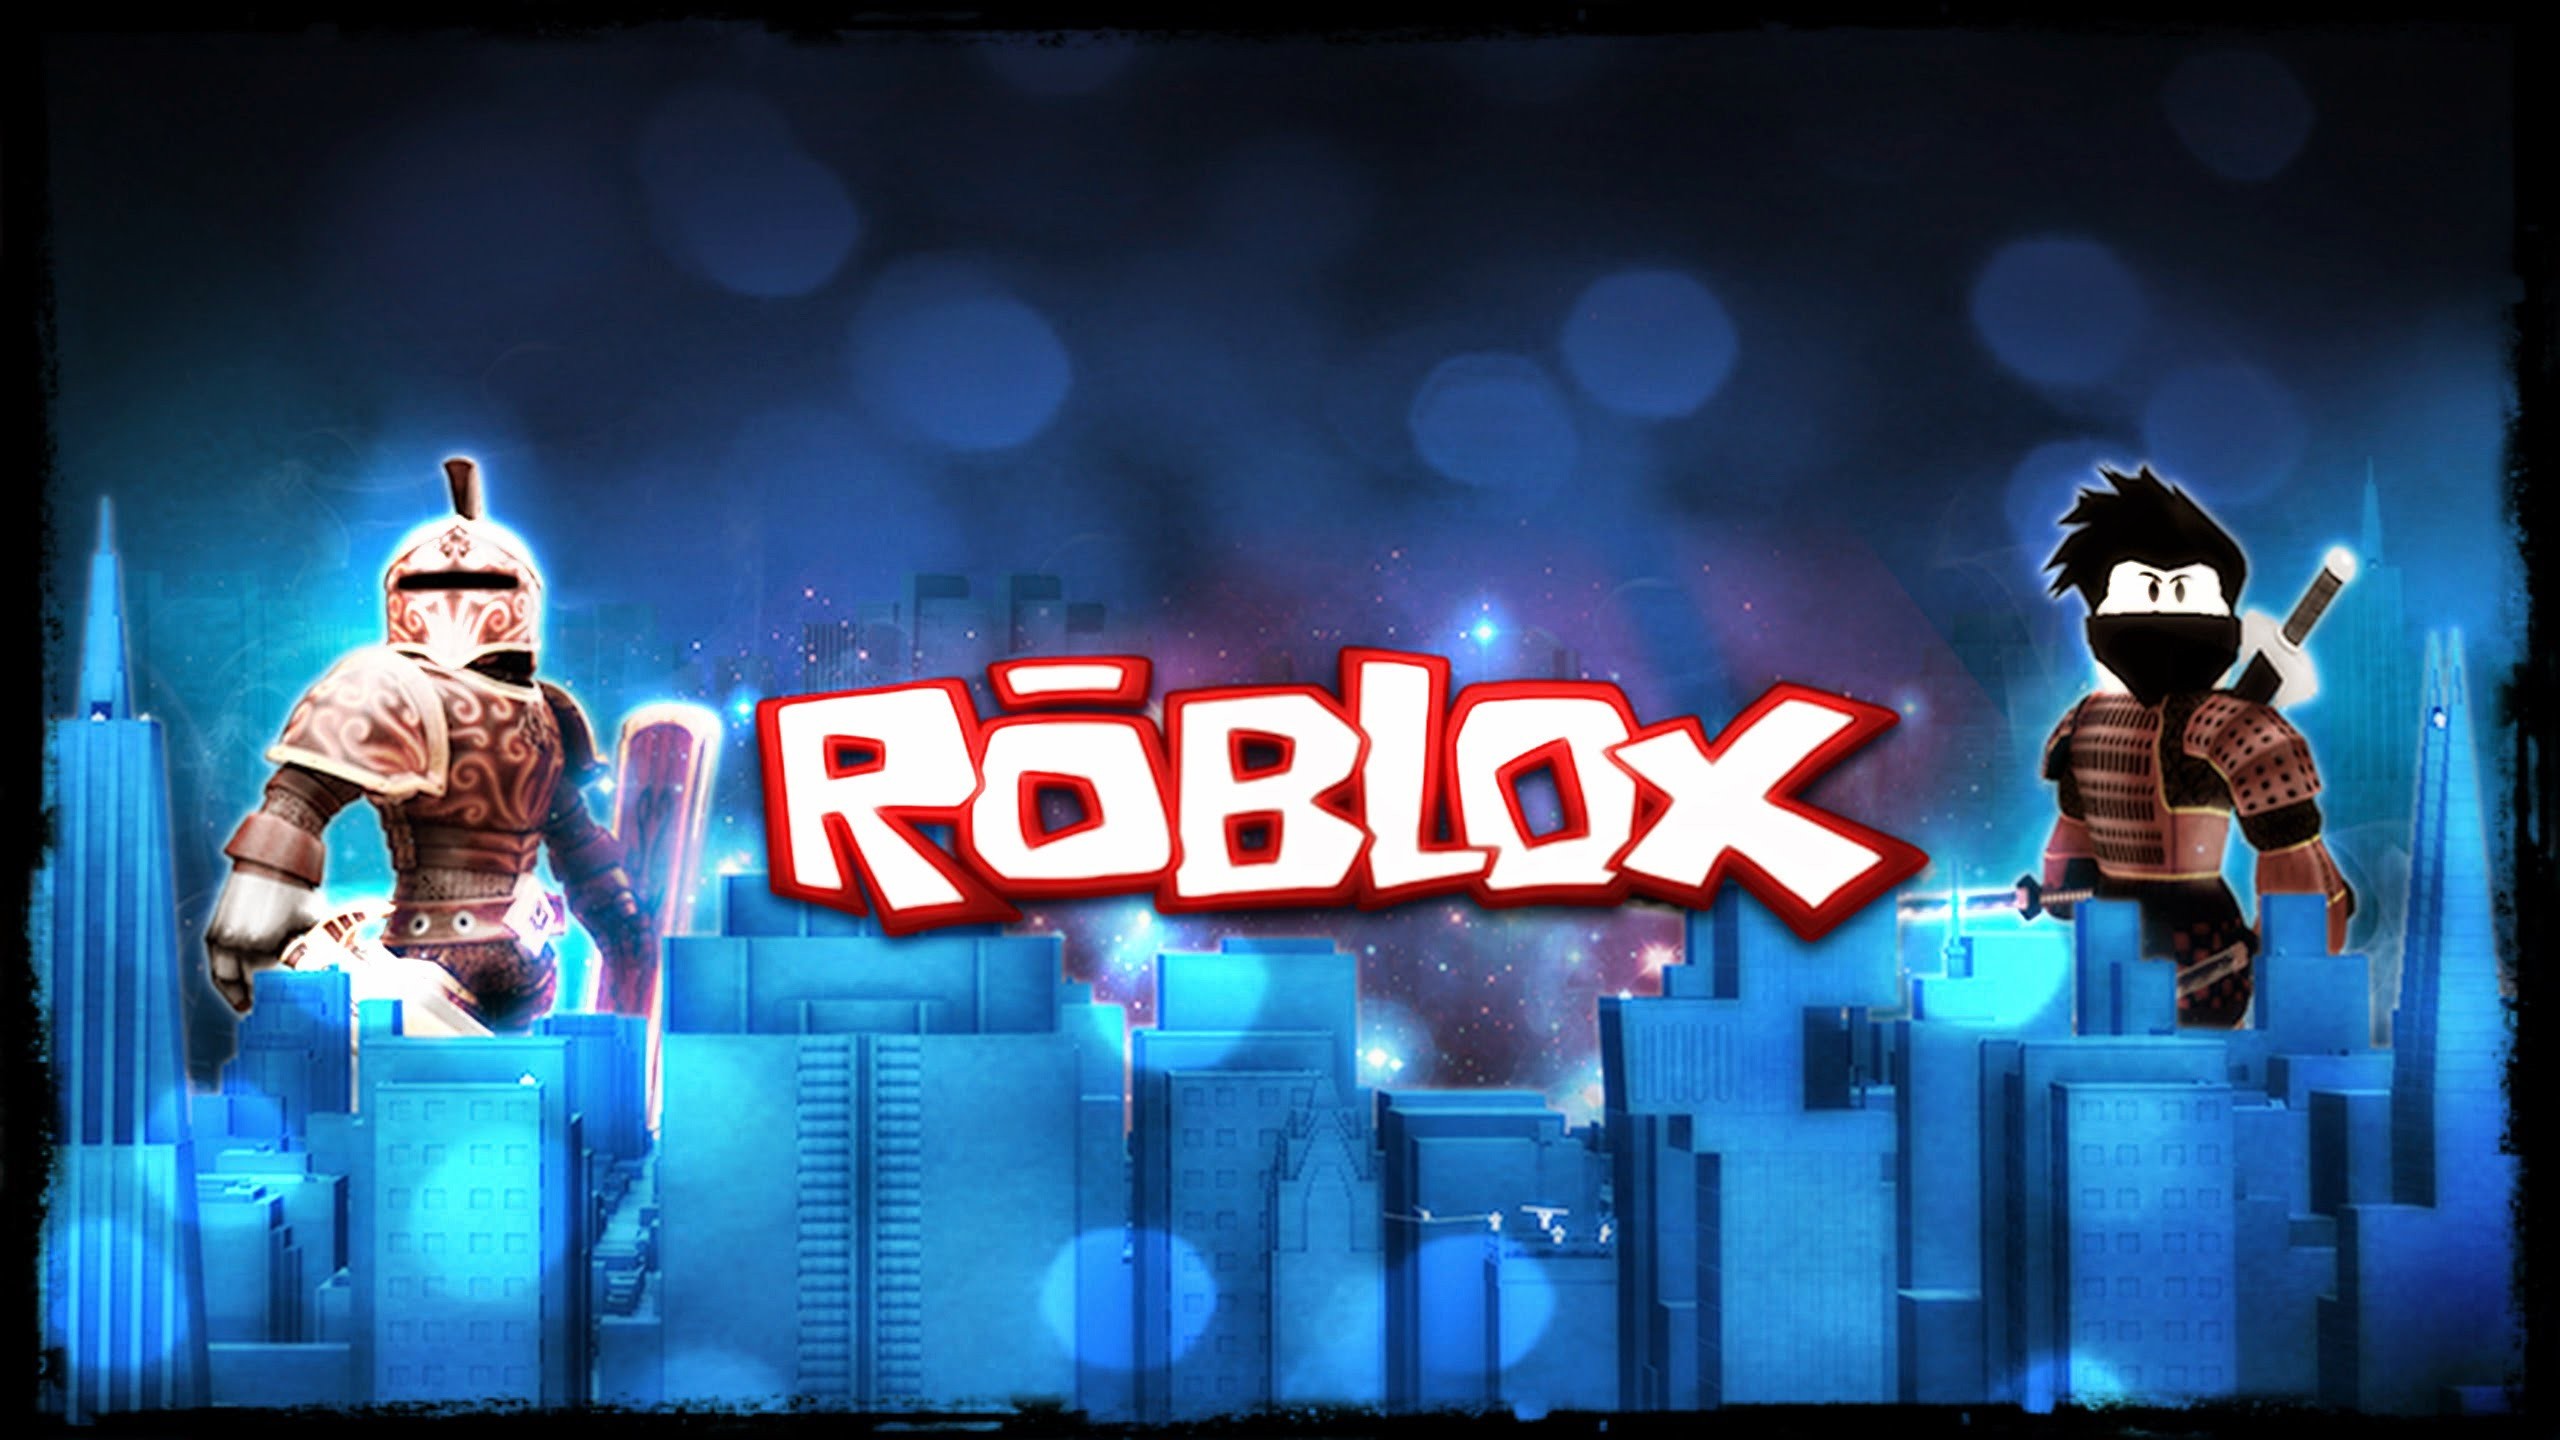 Roblox Background Download Free Beautiful Hd Backgrounds For Desktop Mobile Laptop In Any Resolution Desktop Android Iphone Ipad 1920x1080 480x800 720x1280 1920x1200 Etc Wallpapertag - red knight game in roblox mobile wallpaper 720x1280 hd 4k